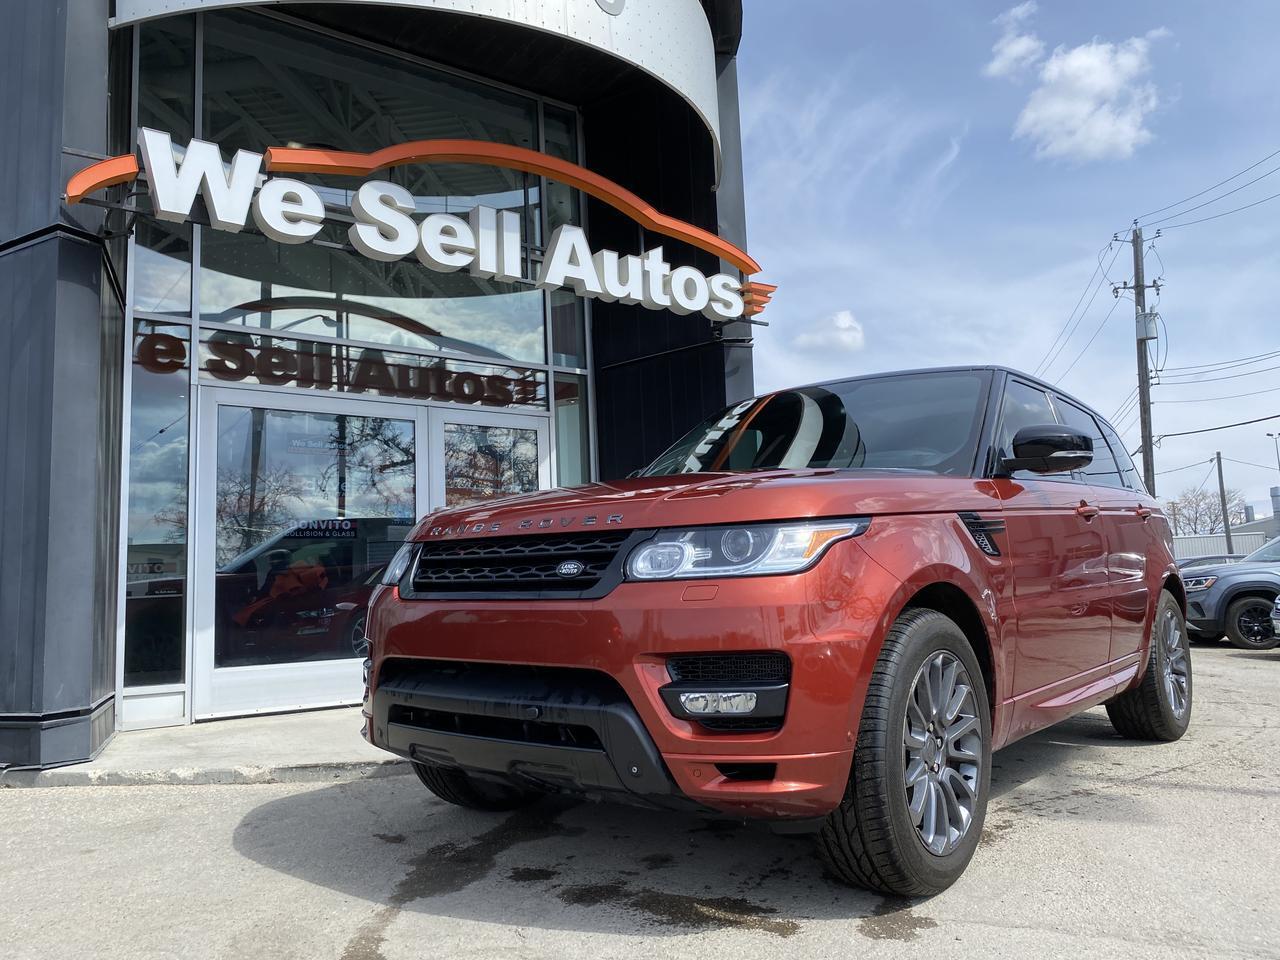 2014 Land Rover Range Rover Sport Autobiography, Supercharged, FULLY LOADED!